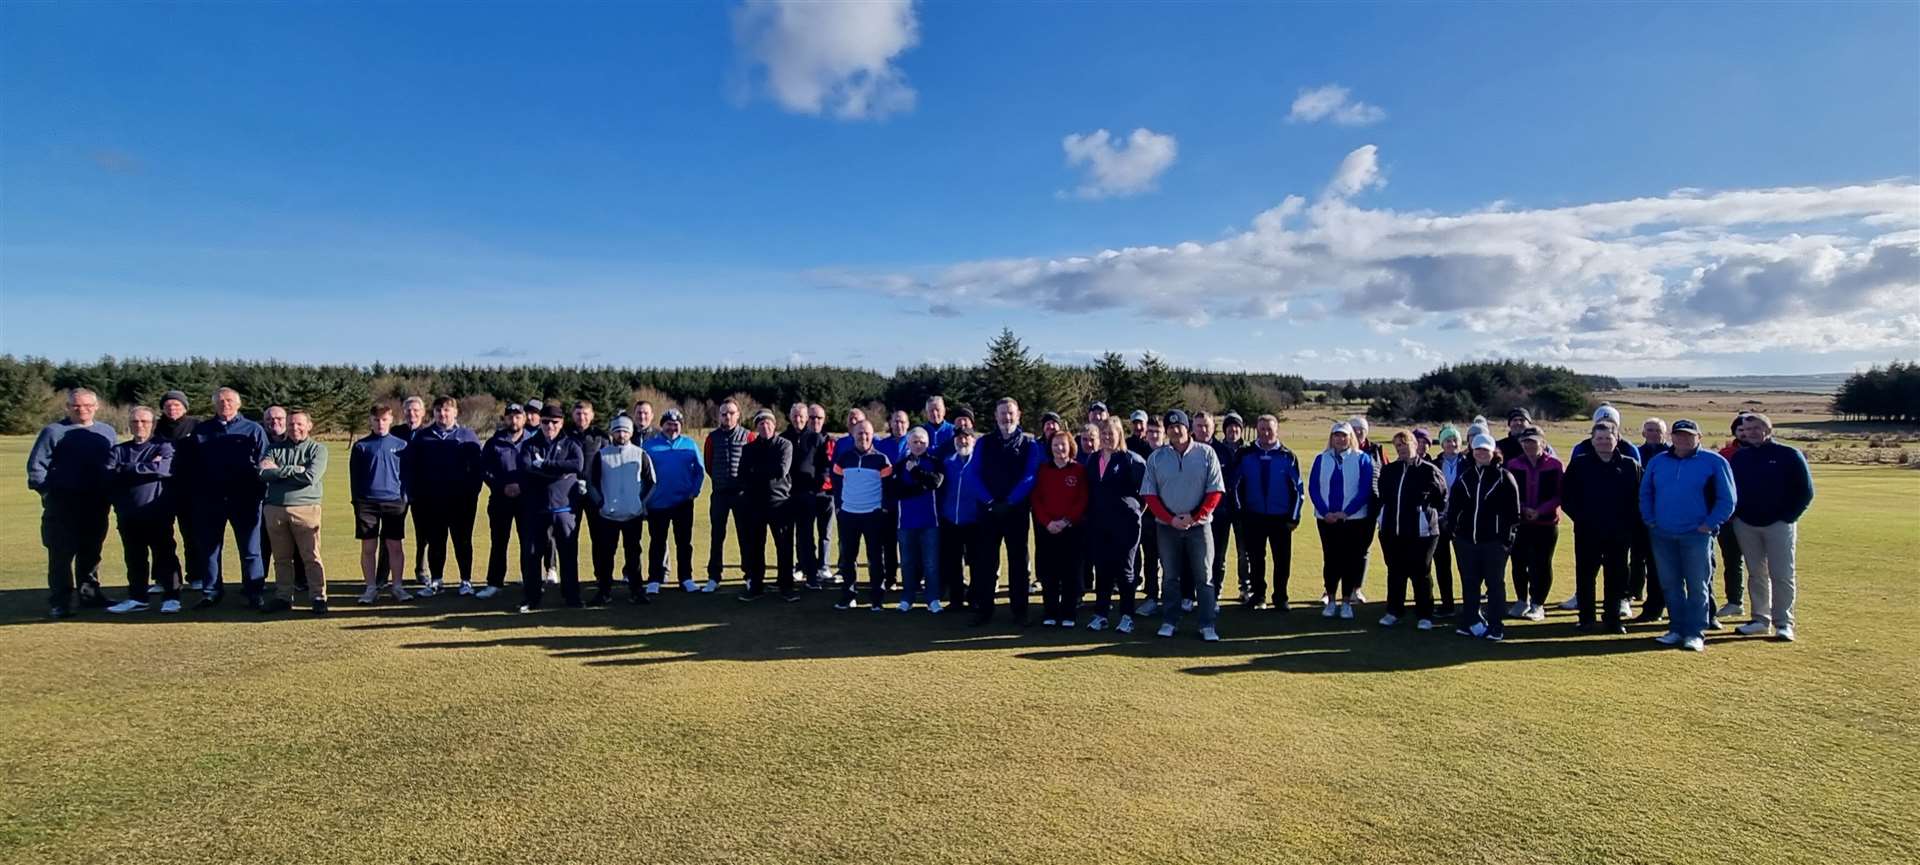 Fifty-six players took part in the season-opening Captain versus Vice-Captain match at Thurso Golf Club. Picture: Chris Sinclair